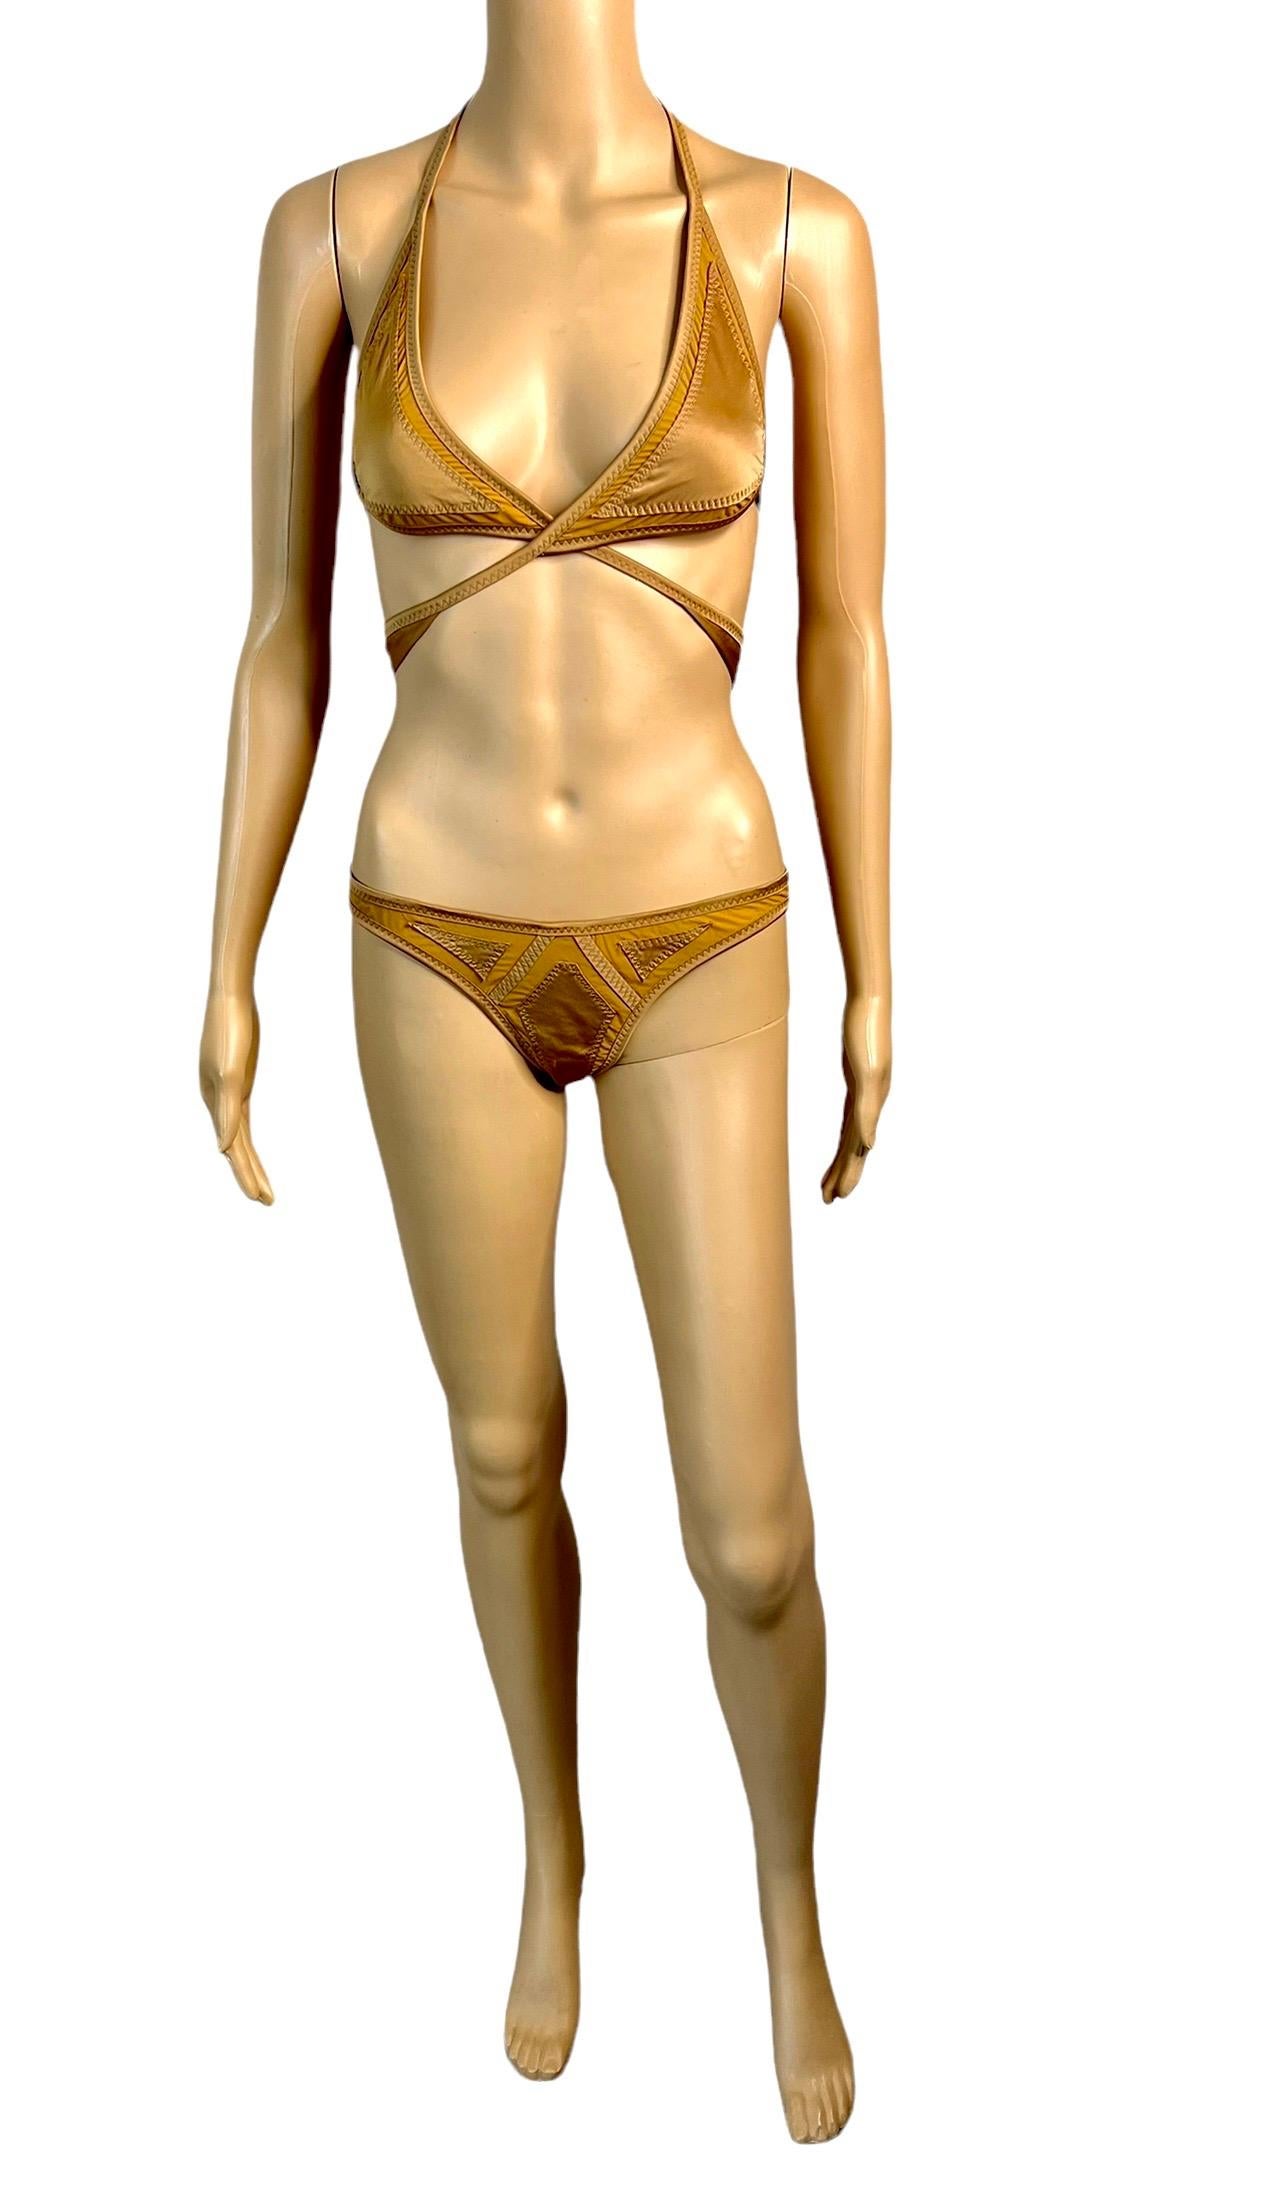 Gucci S/S 2005 Runway Cutout Sheer Panels Two-Piece Bikini Swimsuit Swimwear In Excellent Condition For Sale In Naples, FL